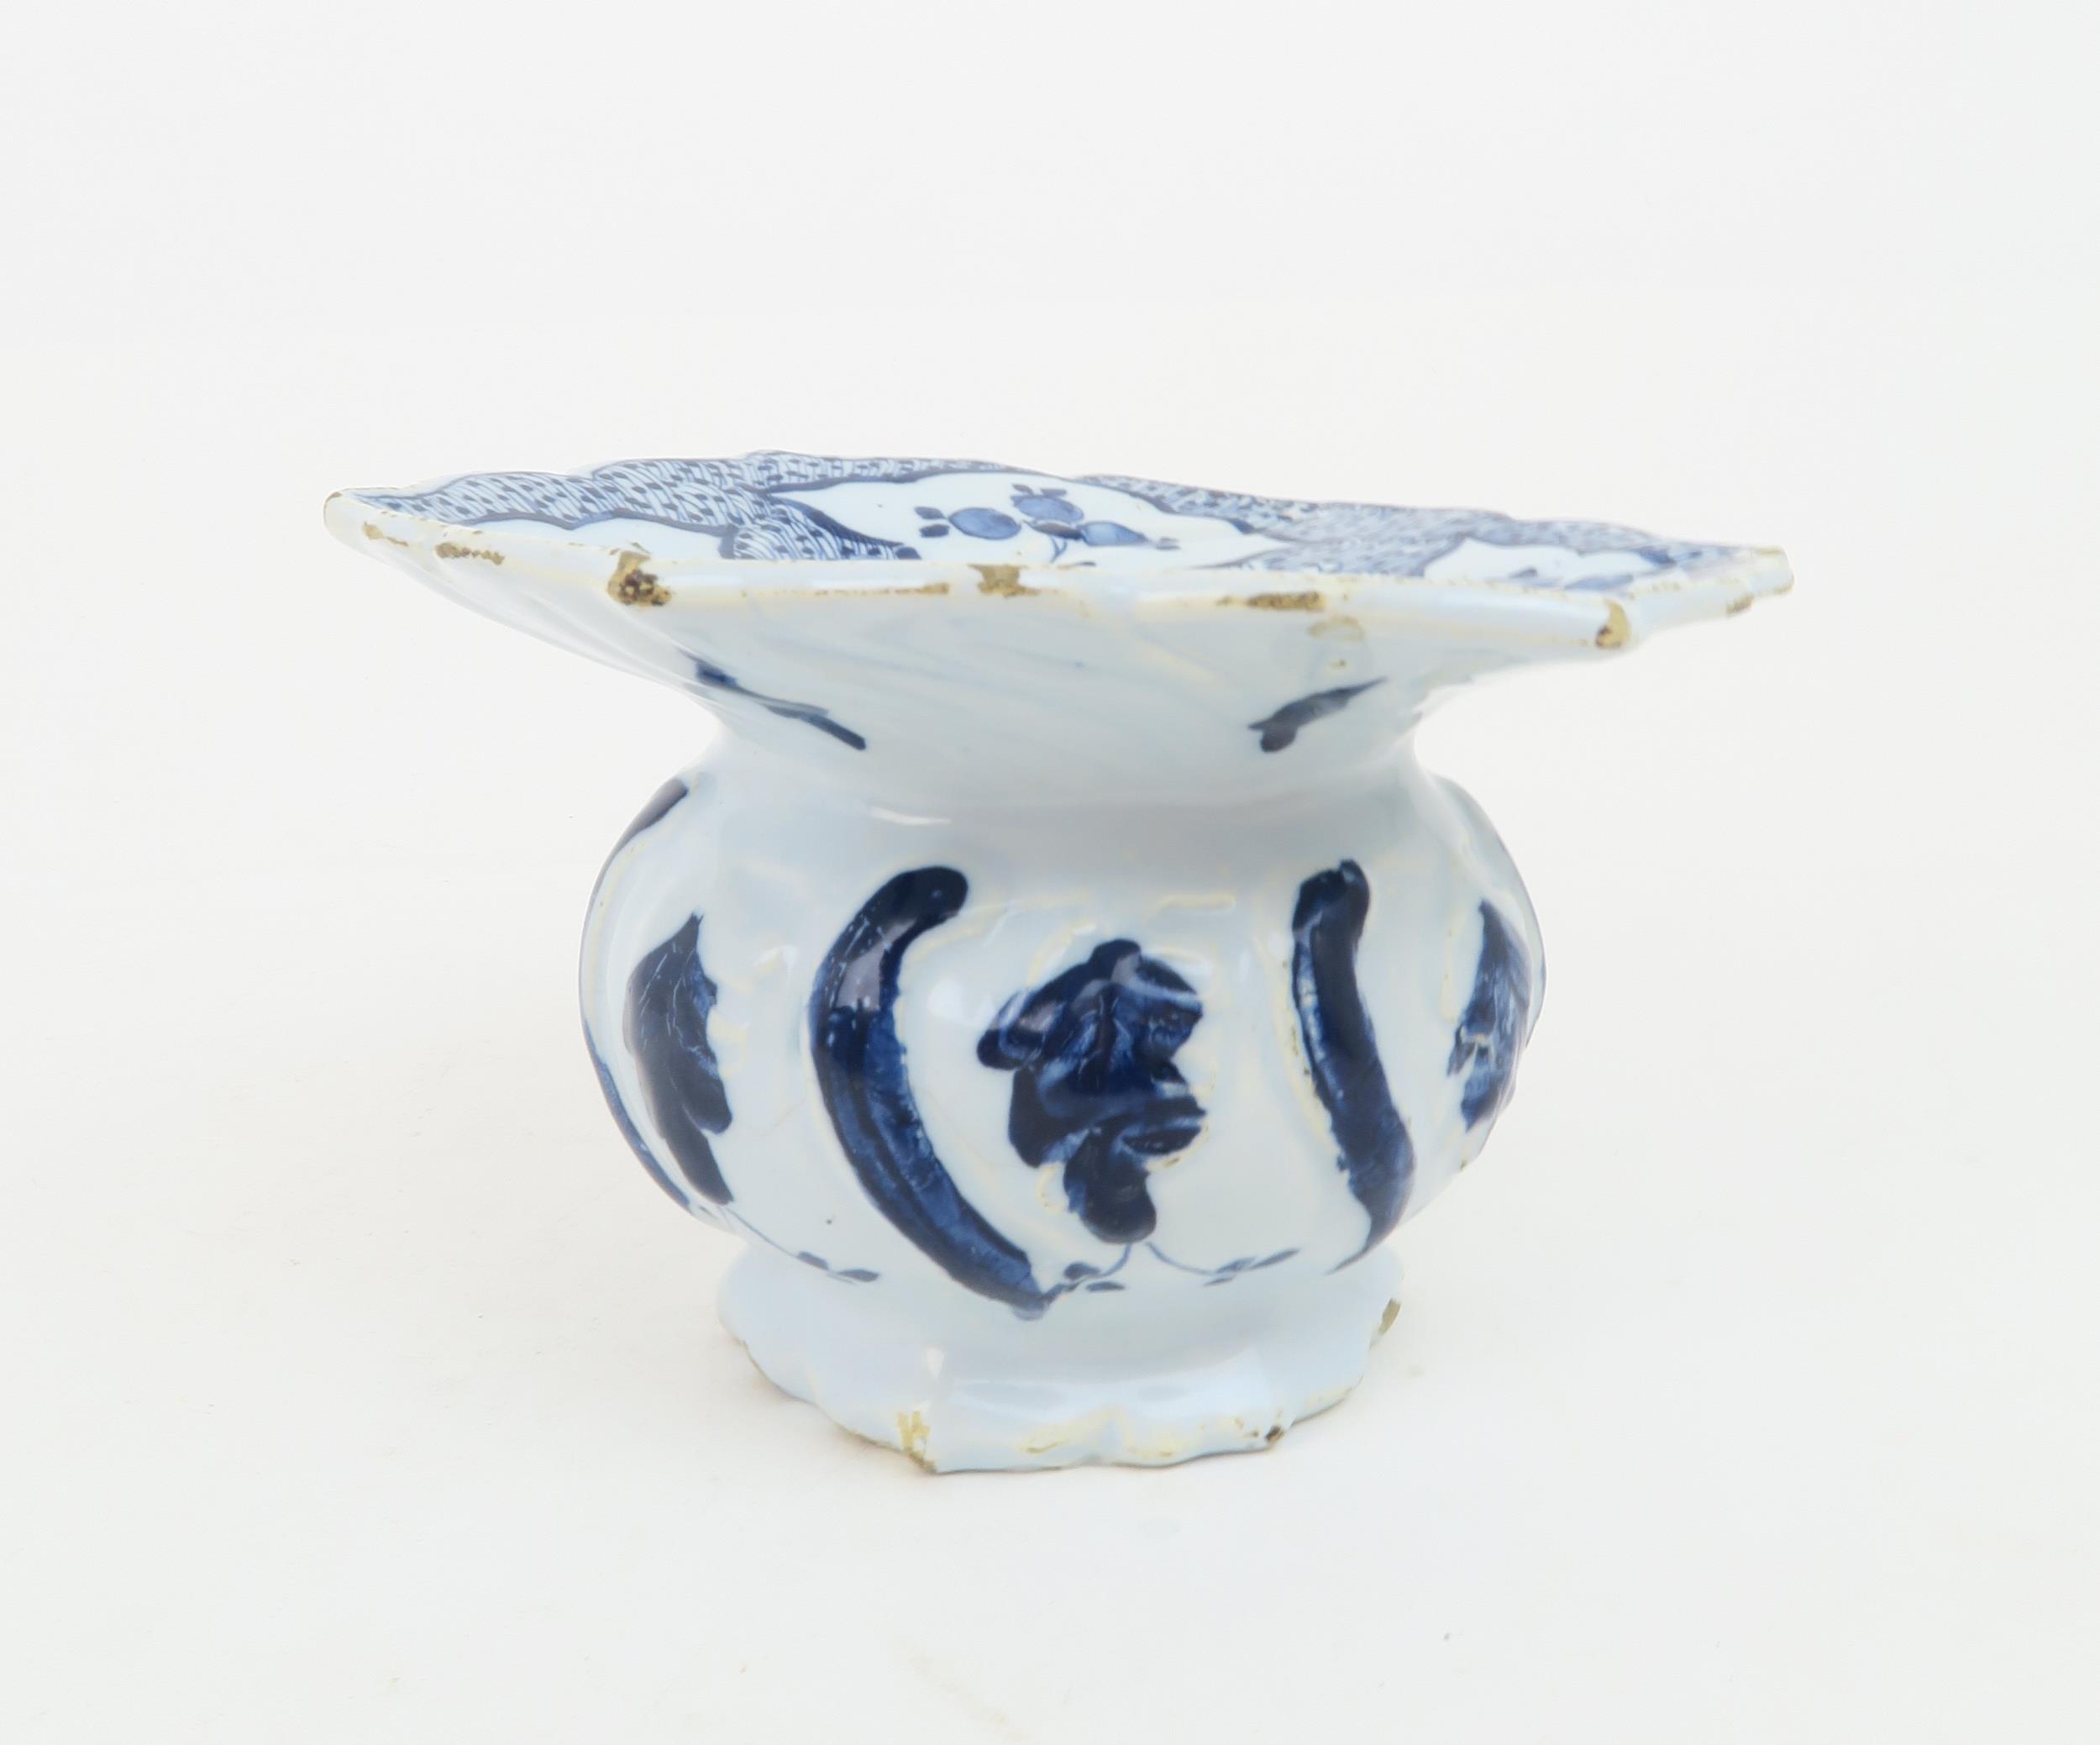 AN 18TH CENTURY DUTCH DELFT SPITTOON with flared scalloped edge, painted with sprigs of flowers, - Image 3 of 6